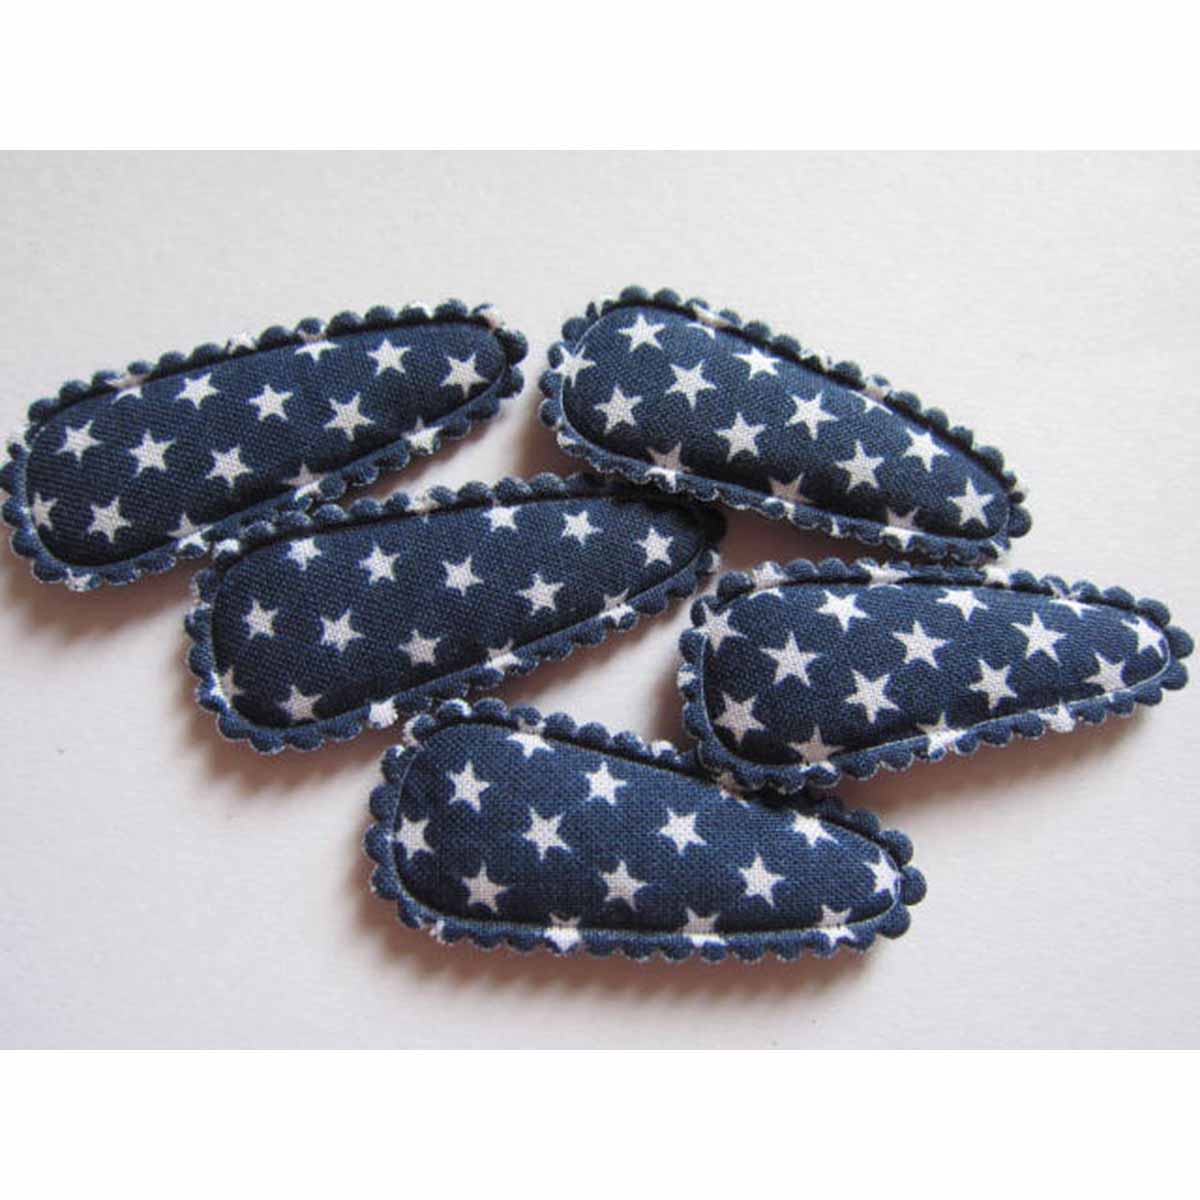 80 Padded Star Print 35mm Hair Clip Covers-Navy